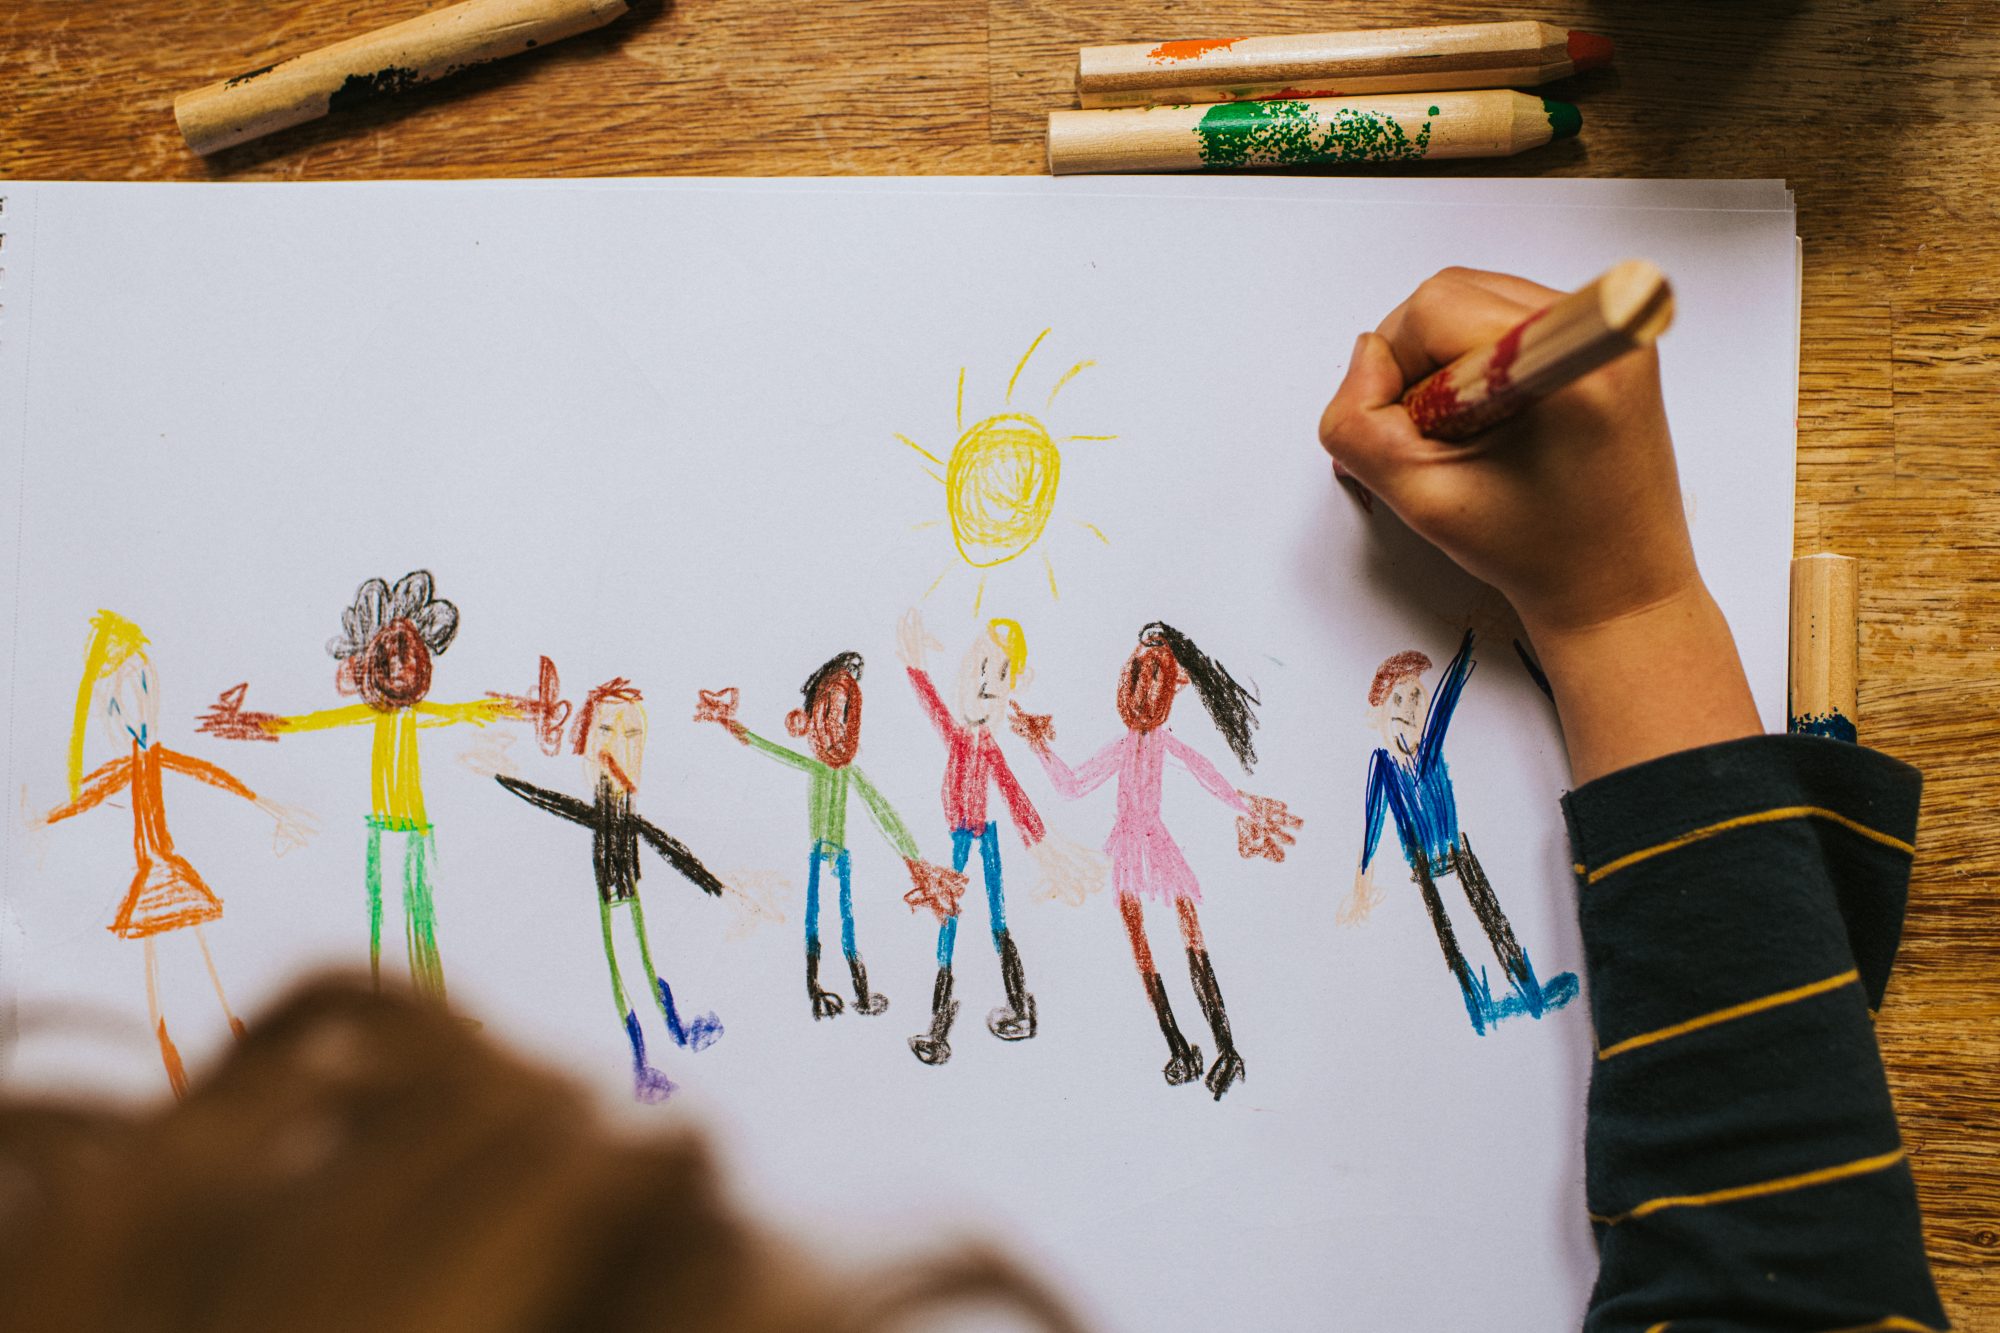 A child's colorful drawing of diverse people holding hands